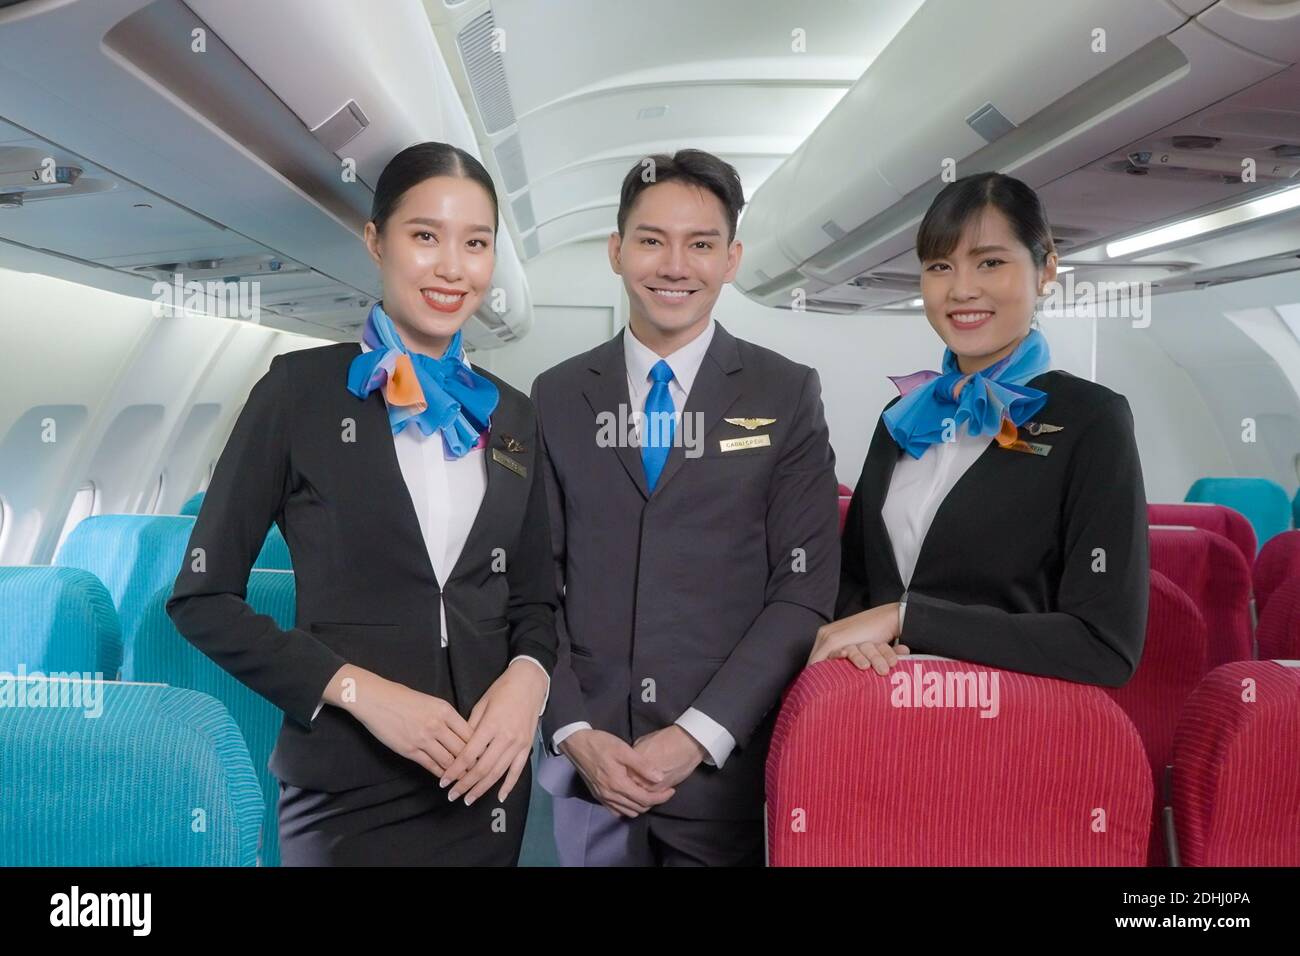 Portrait of three man and woman in blue suit flight attendant/air hostess in economy class cabin smiling to welcome passenger at airplane. Stock Photo